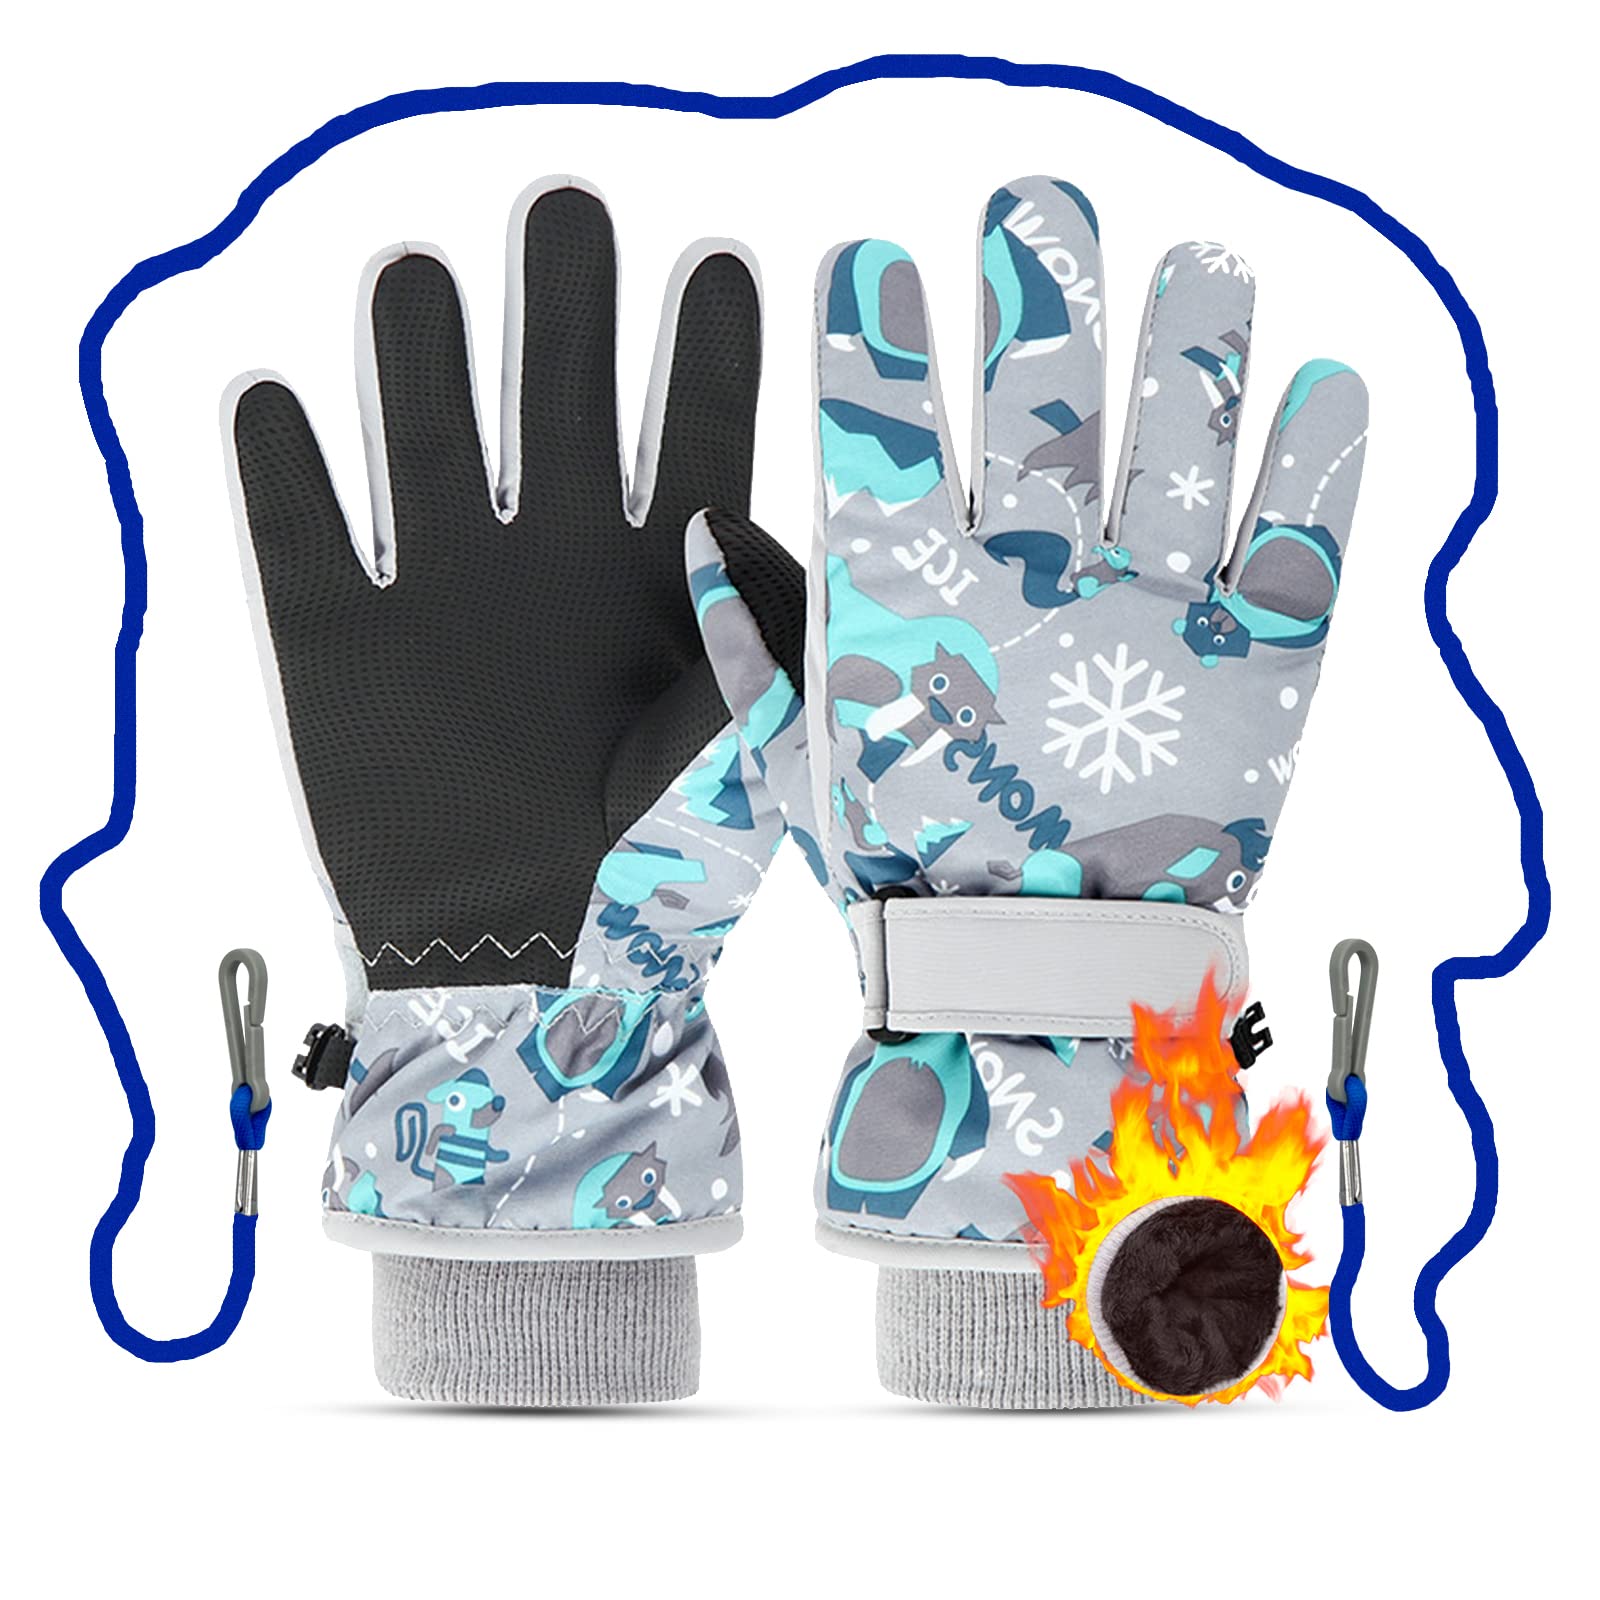 Caudblor Ski Gloves for Kids, Waterproof Winter Gloves for Boys Girls,  Insulated Youth Winter Gloves Age 7-12 Years Old, Warm Thick Ski Snowboard  Gloves for Children Outdoor Sledding Large Gray